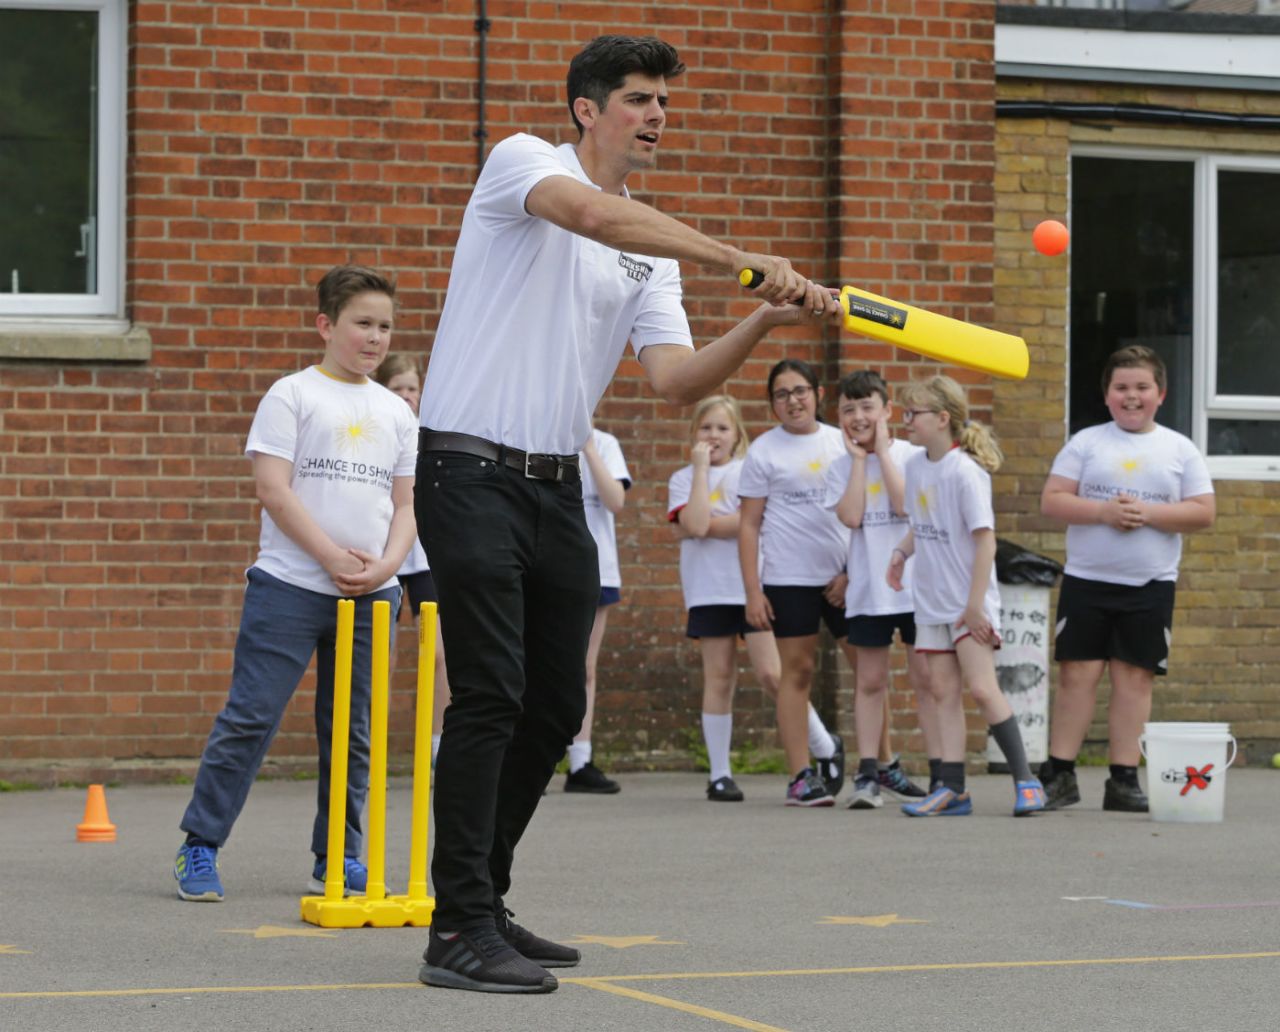 Alastair Cook plays cricket with schoolkids during a Chance to Shine / Yorkshire Tea event, Tunbridge Wells, April 24, 2018